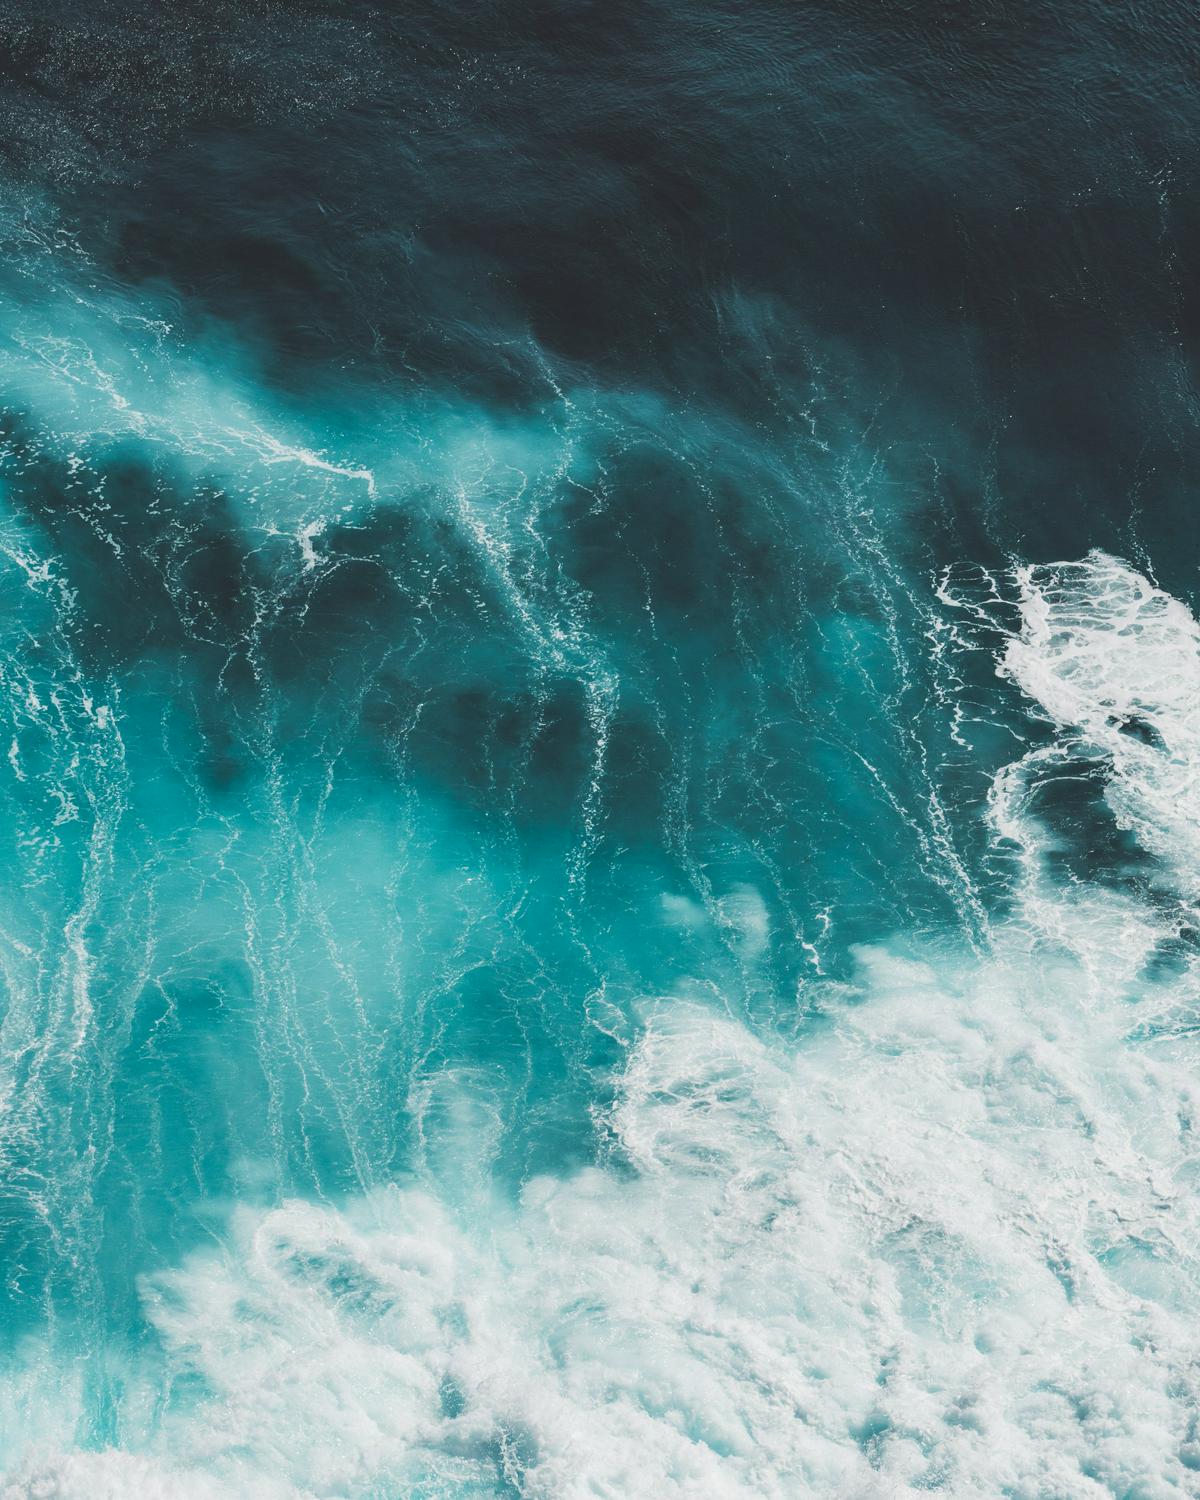 An image of the ocean water near the coast of La Jolla, with varying shades of blue and green reflecting the different depths and temperatures of the water.